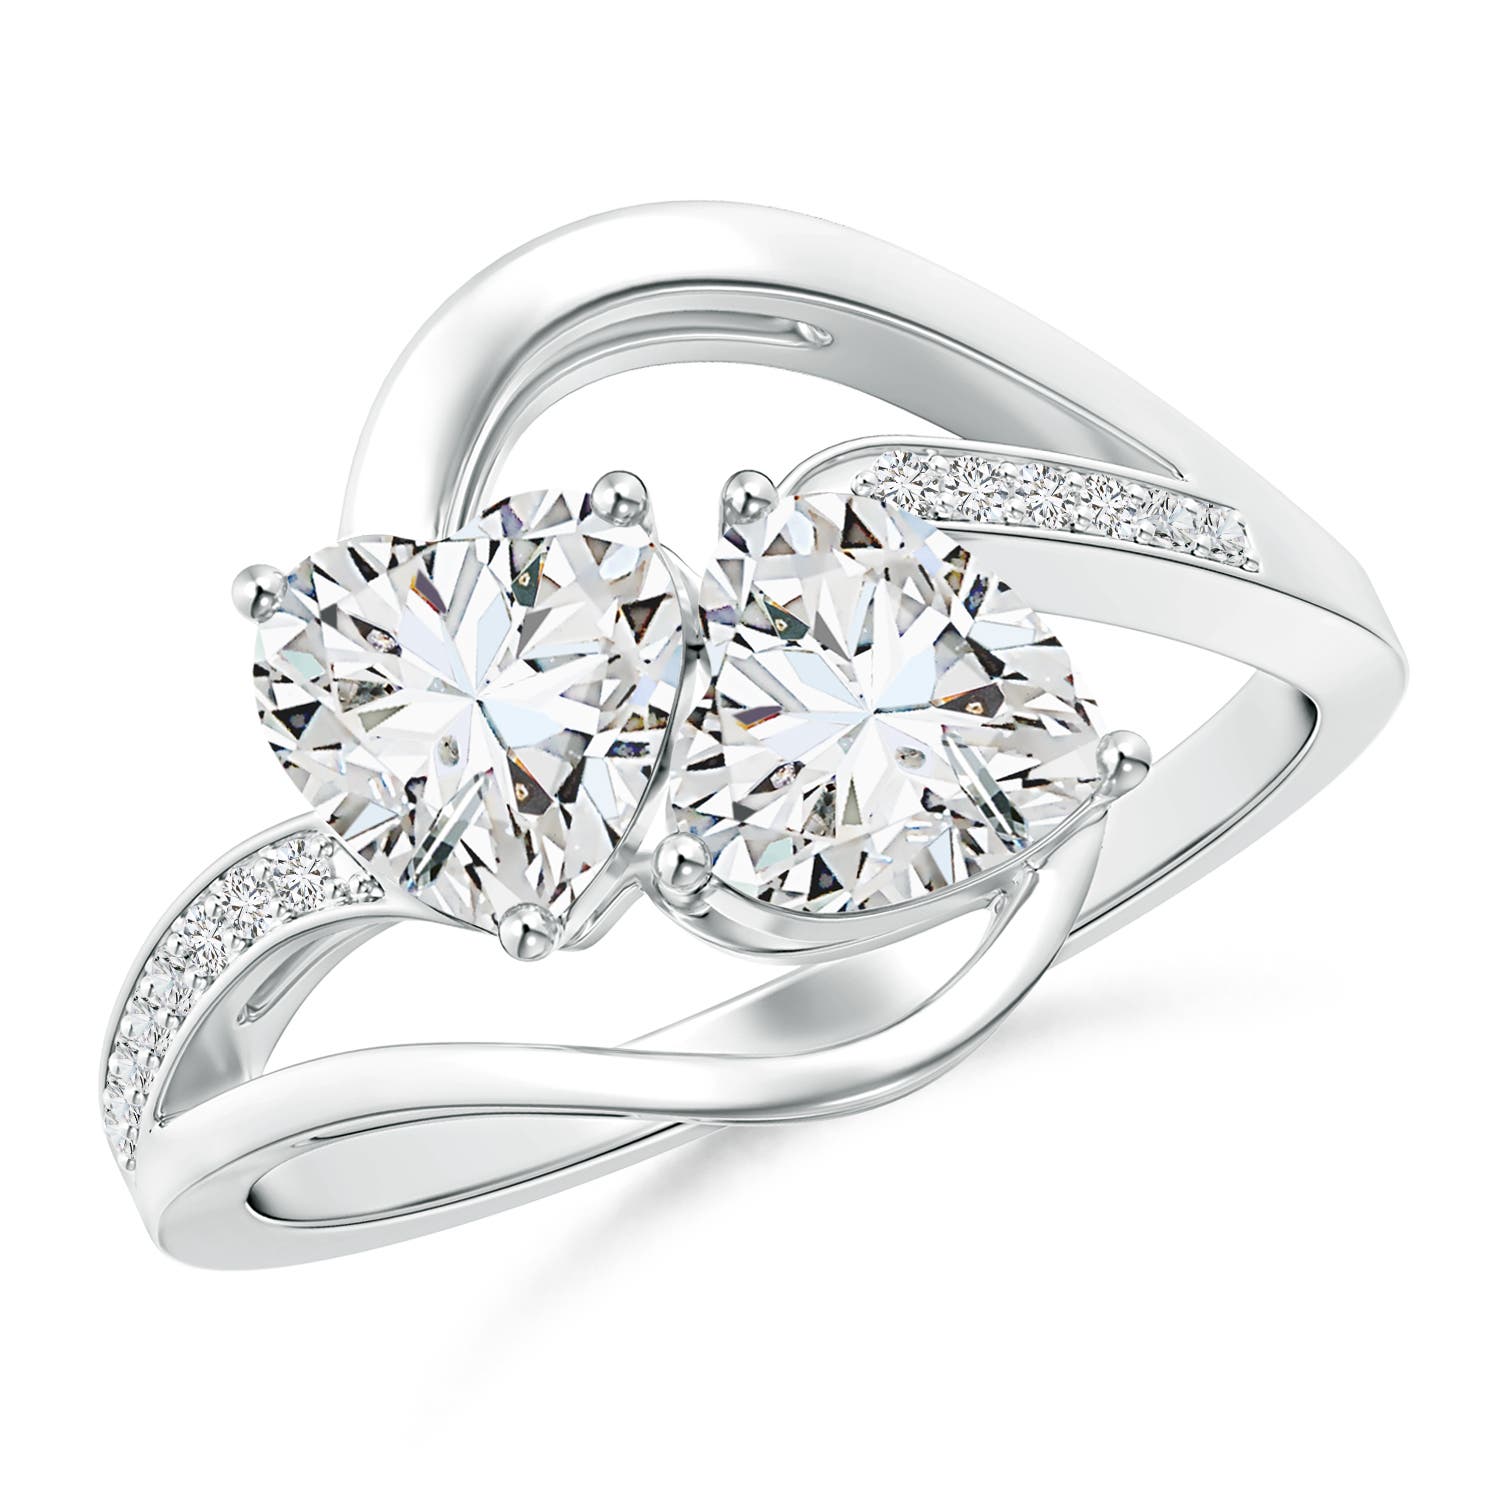 H, SI2 / 1.51 CT / 14 KT White Gold